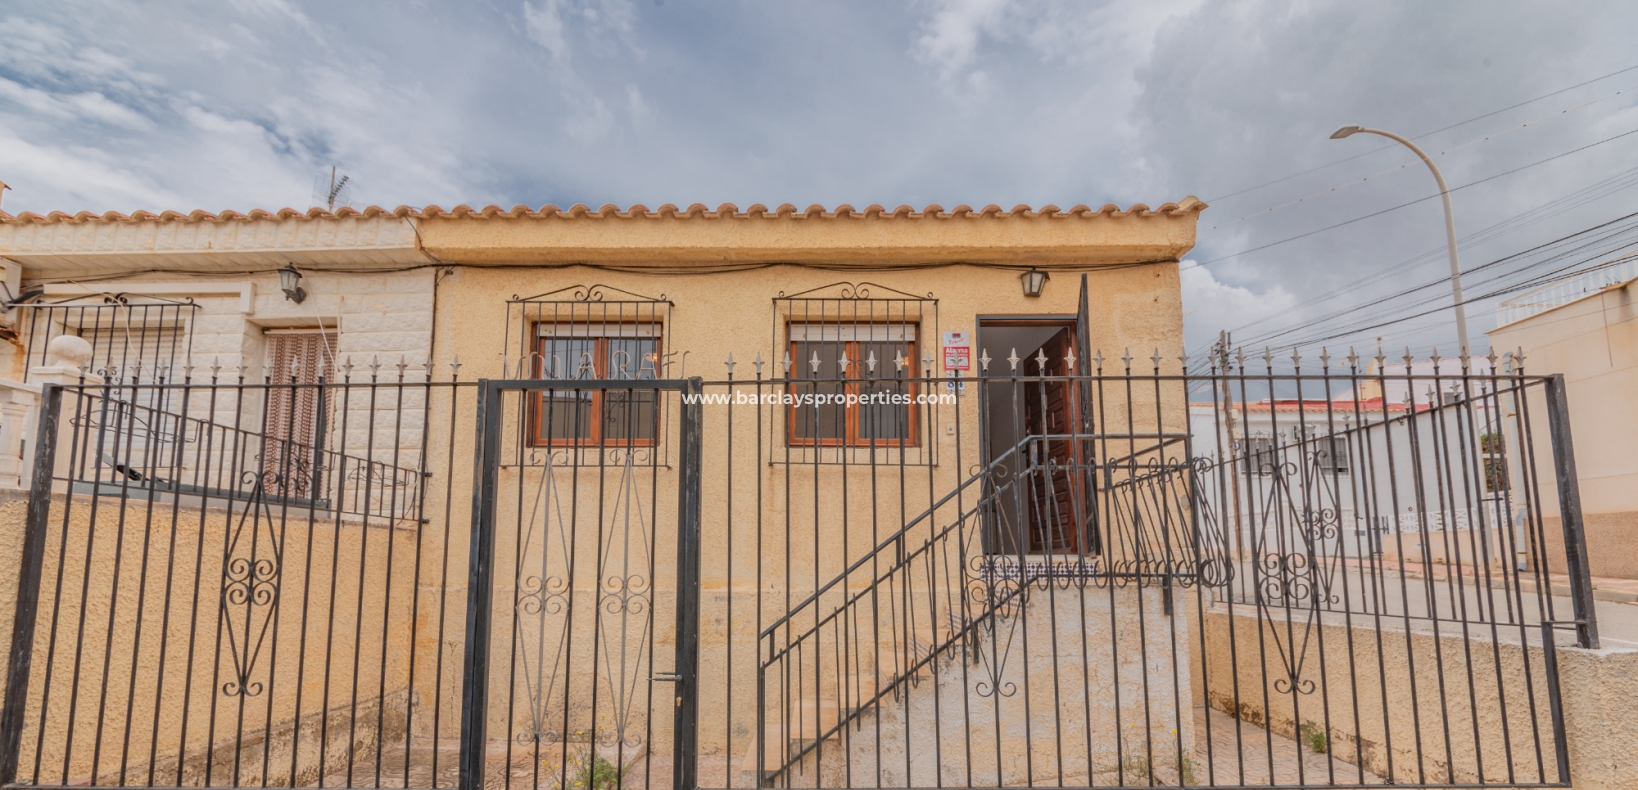 Investment property for sale in Costa Blanca